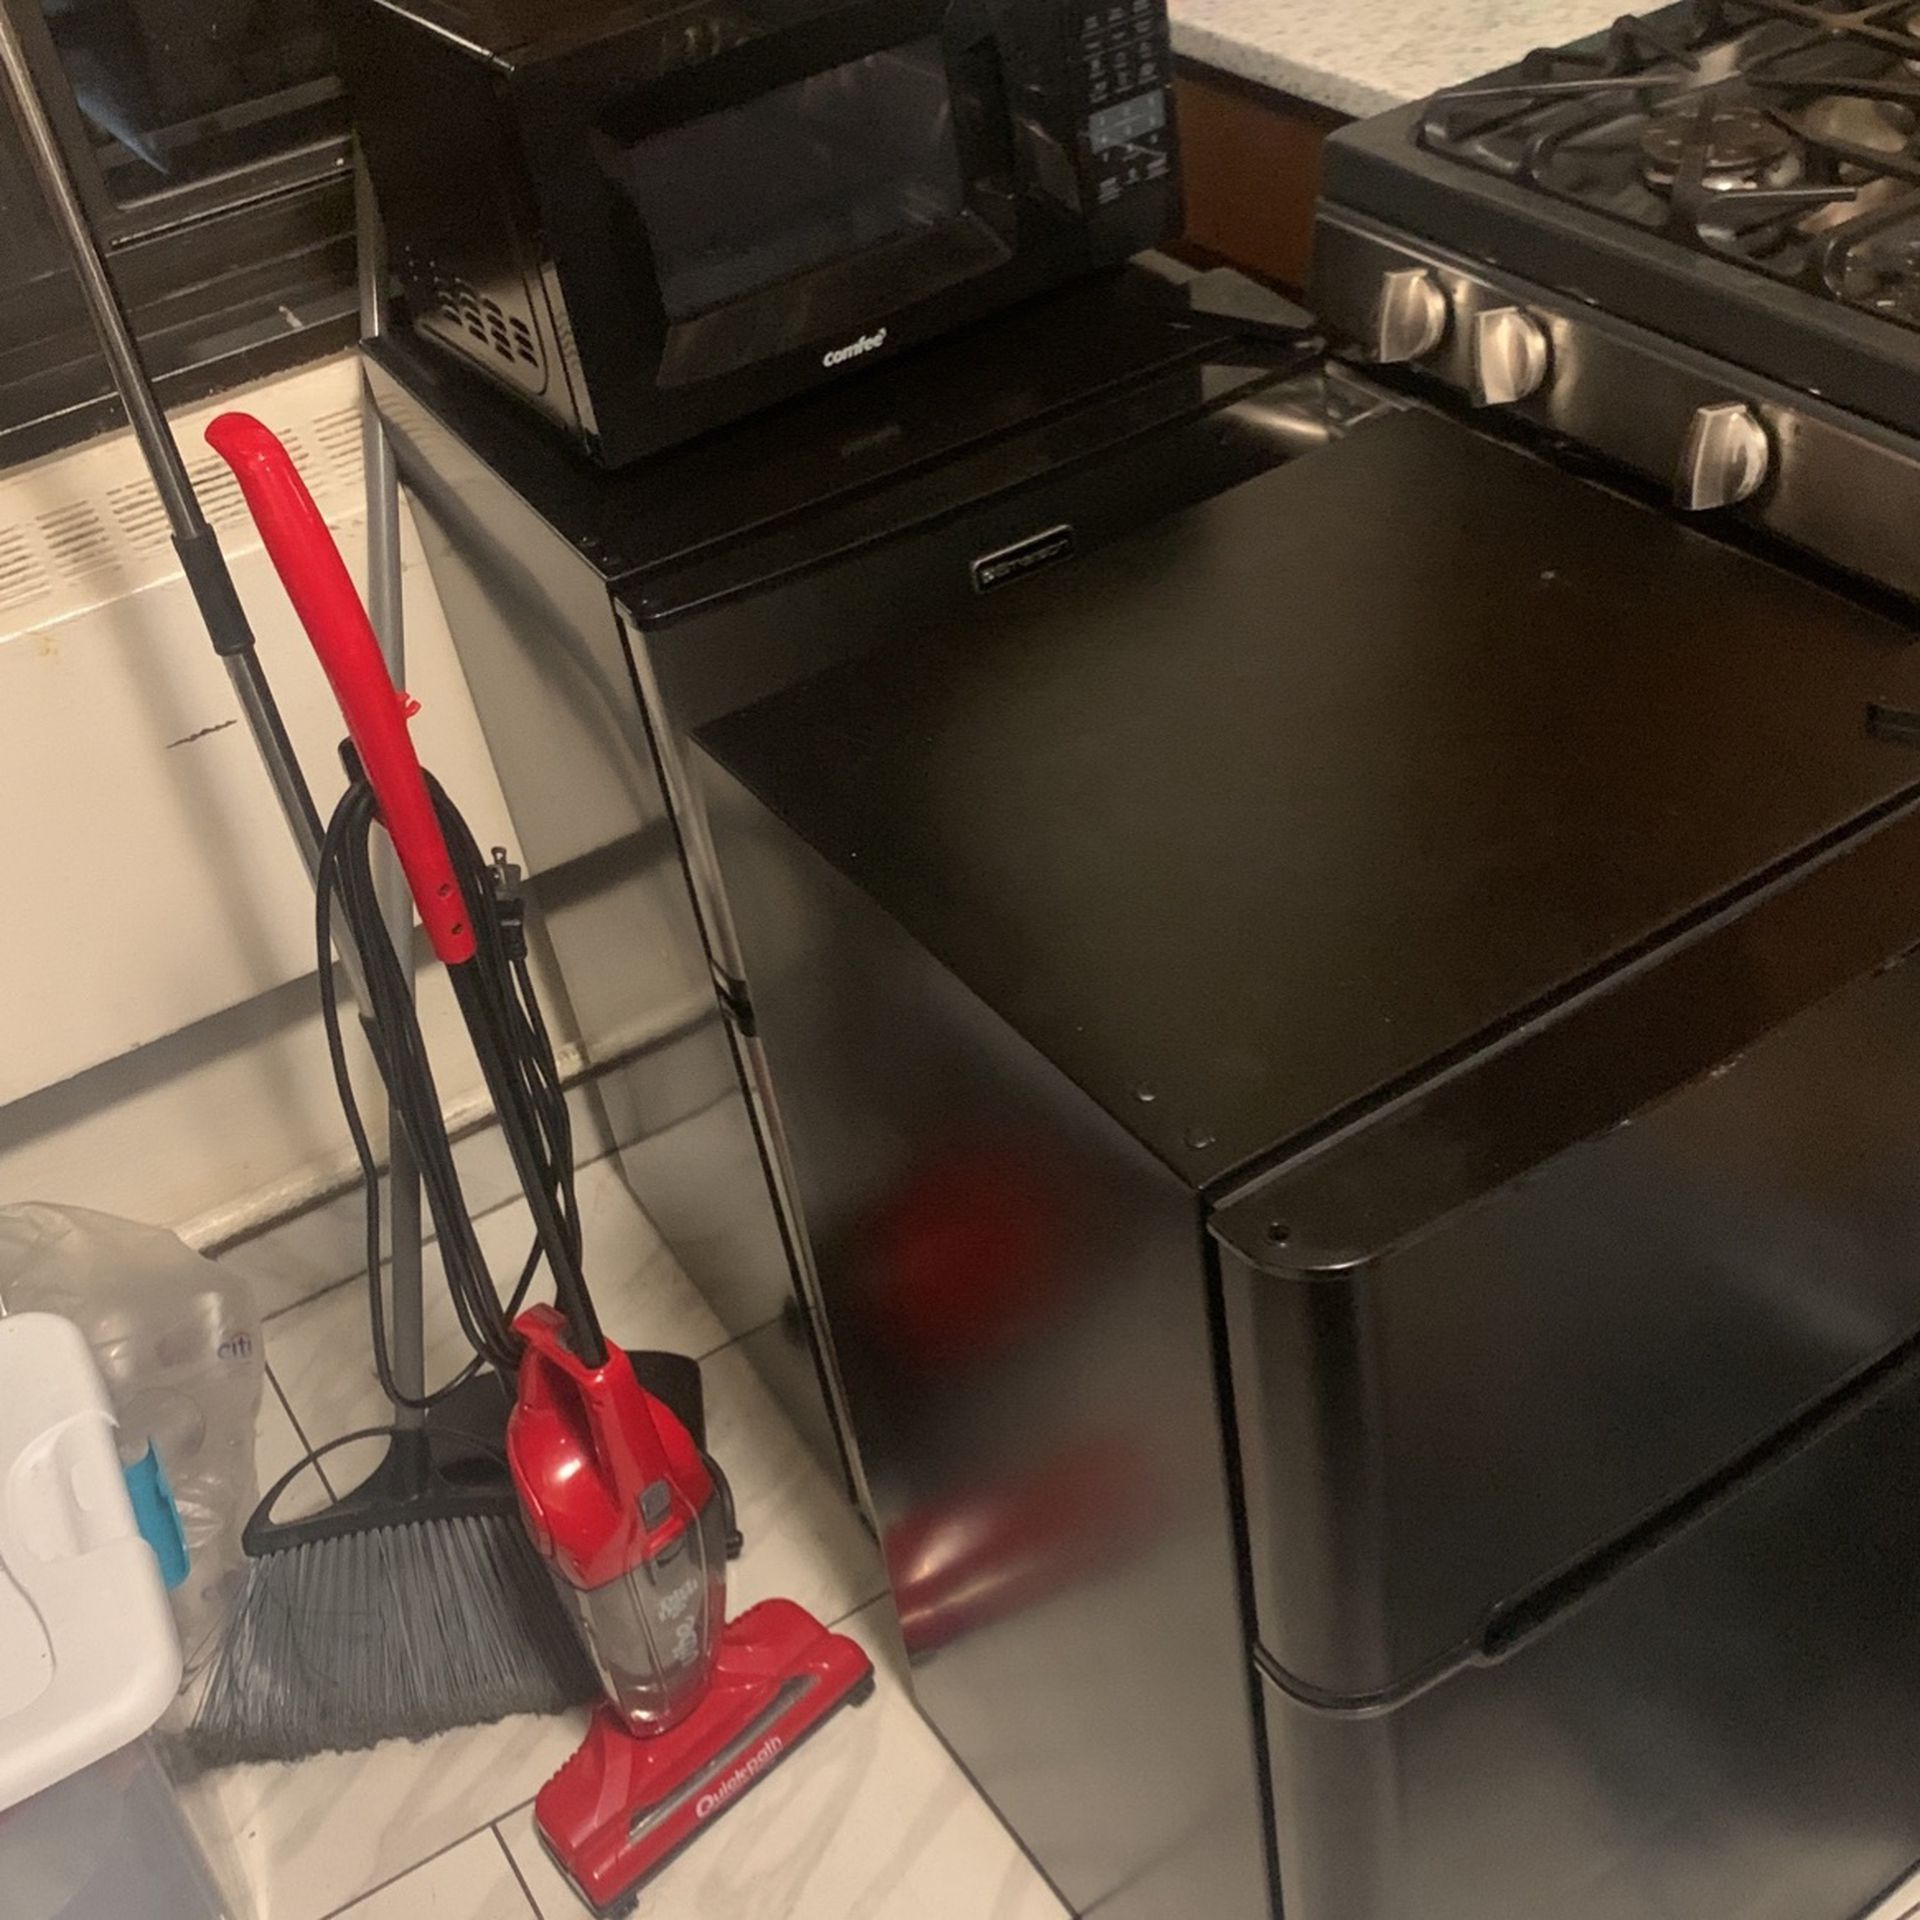 2 Mini Fridges And A Microwave (let’s Talk Prices)